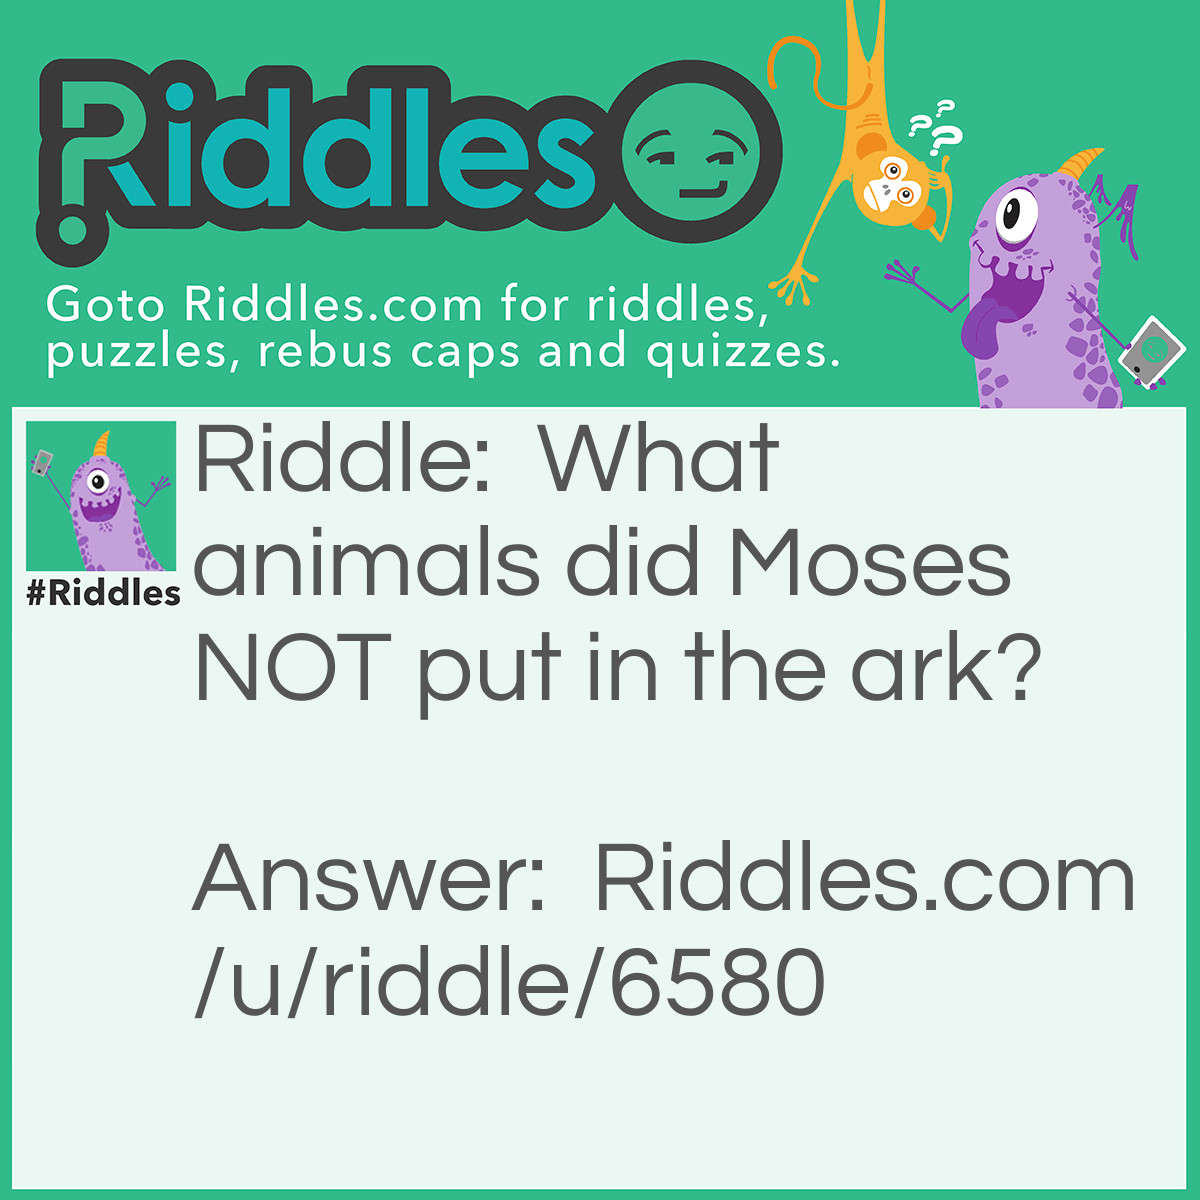 Riddle: What animals did Moses NOT put in the ark? Answer: Didn't Noah build the ark?